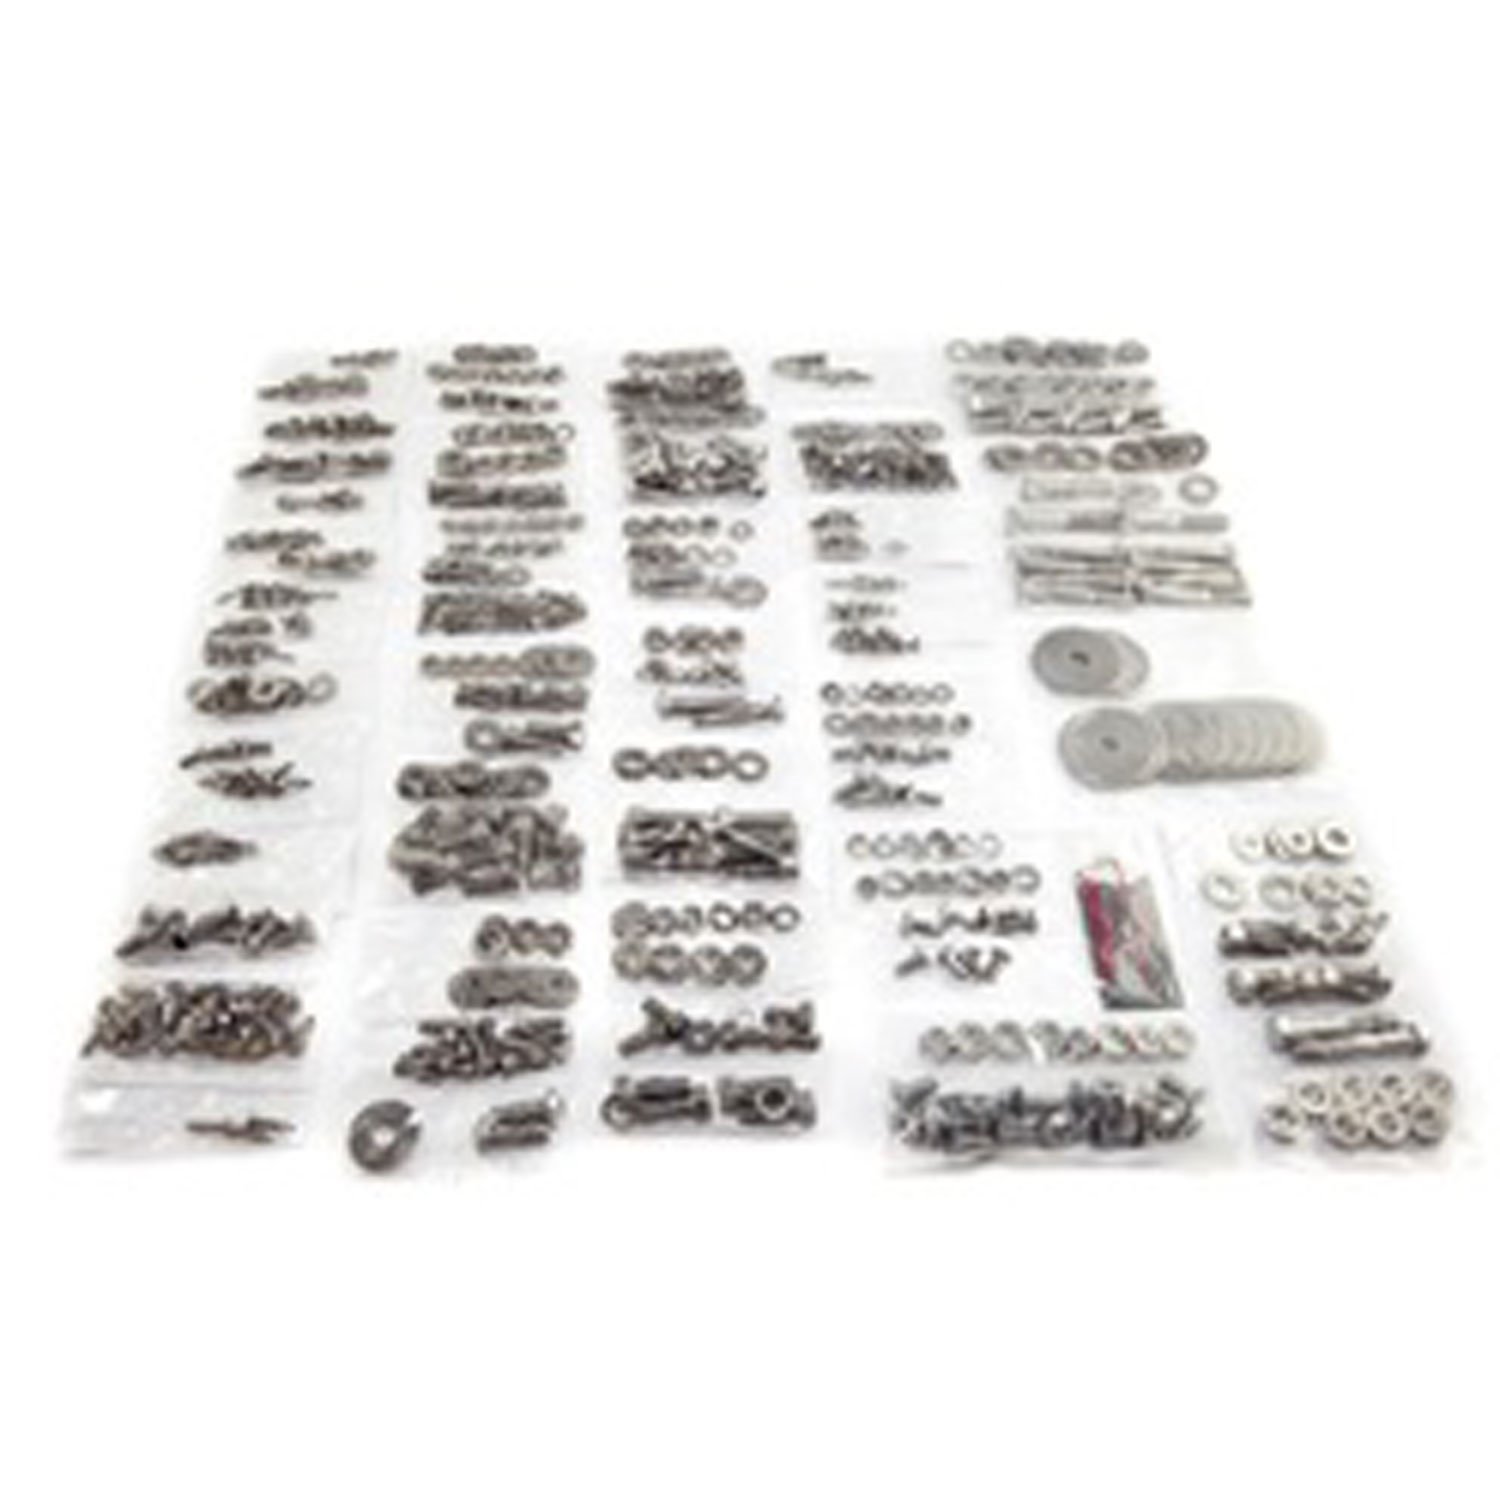 This 539 piece stainless steel body fastener kit